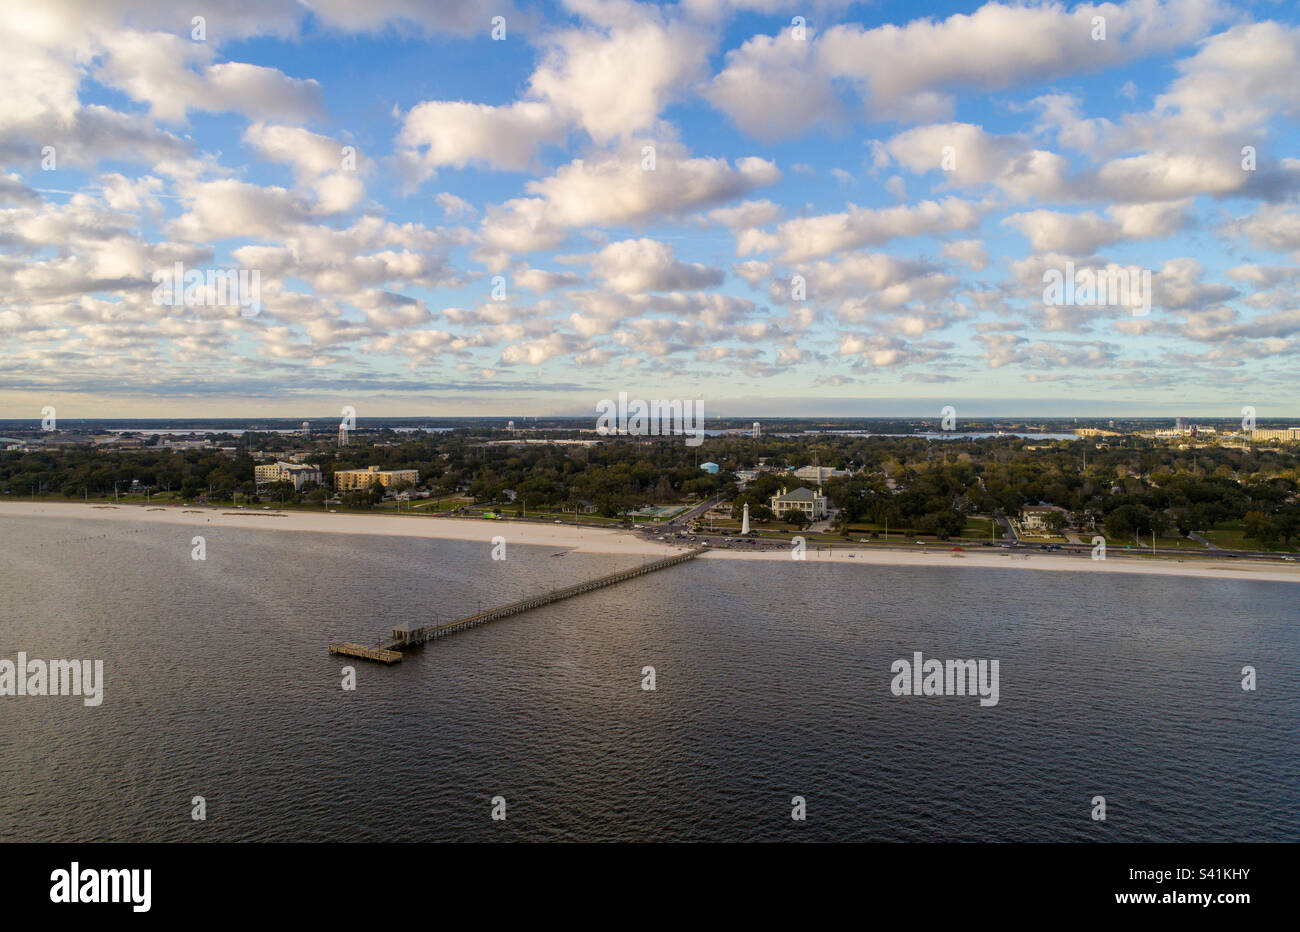 Aerial view of the beach in Biloxi, Mississippi Stock Photo